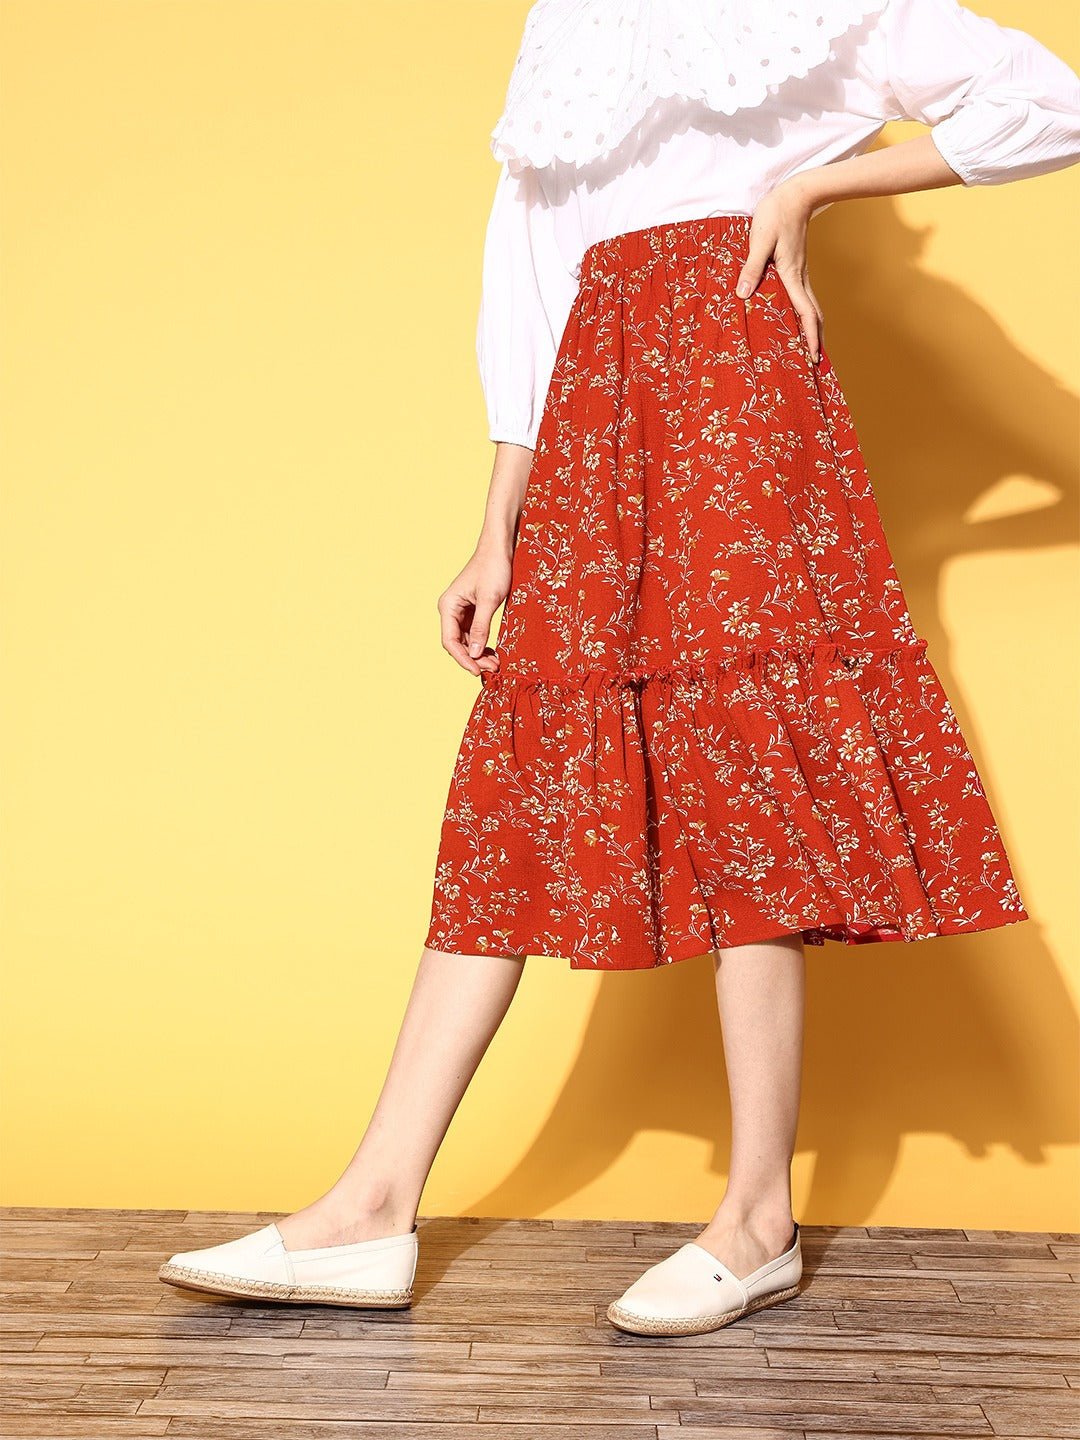 Folk Republic Women Red & Off-White Micro Ditsy Floral Printed Crepe Tiered A-Line Midi Skirt - #folk republic#